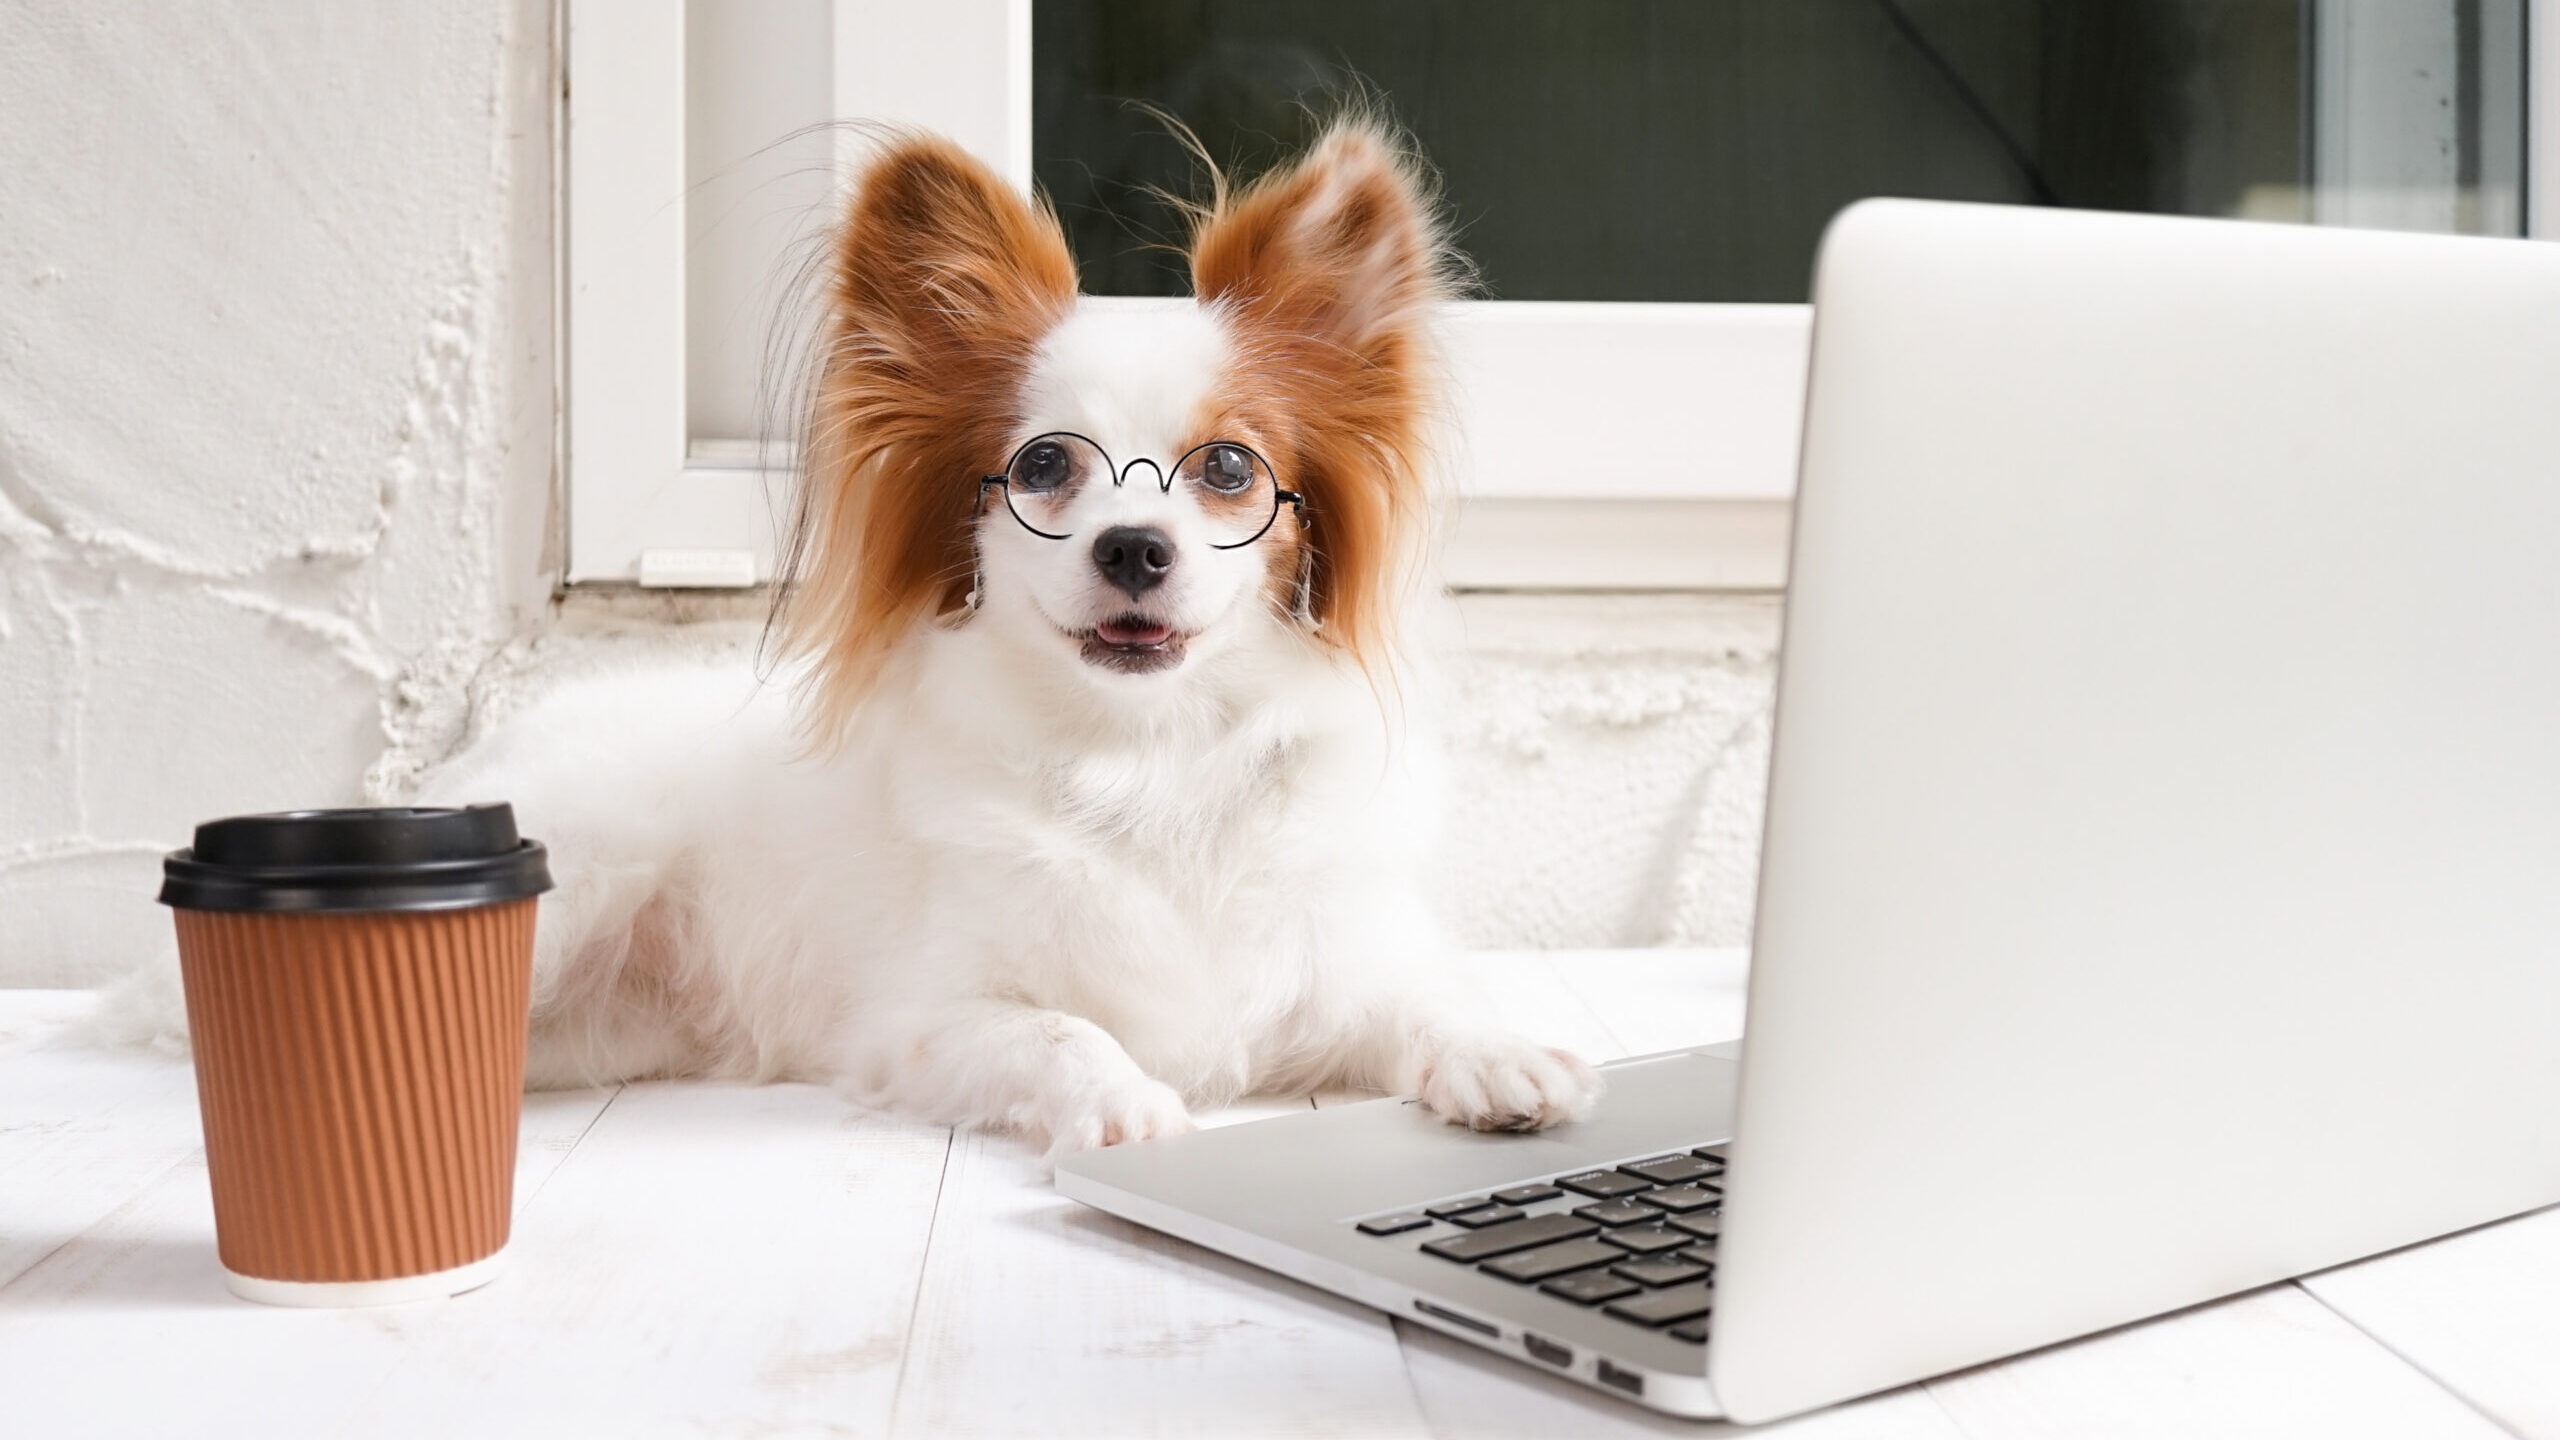 Cute dog works at laptop